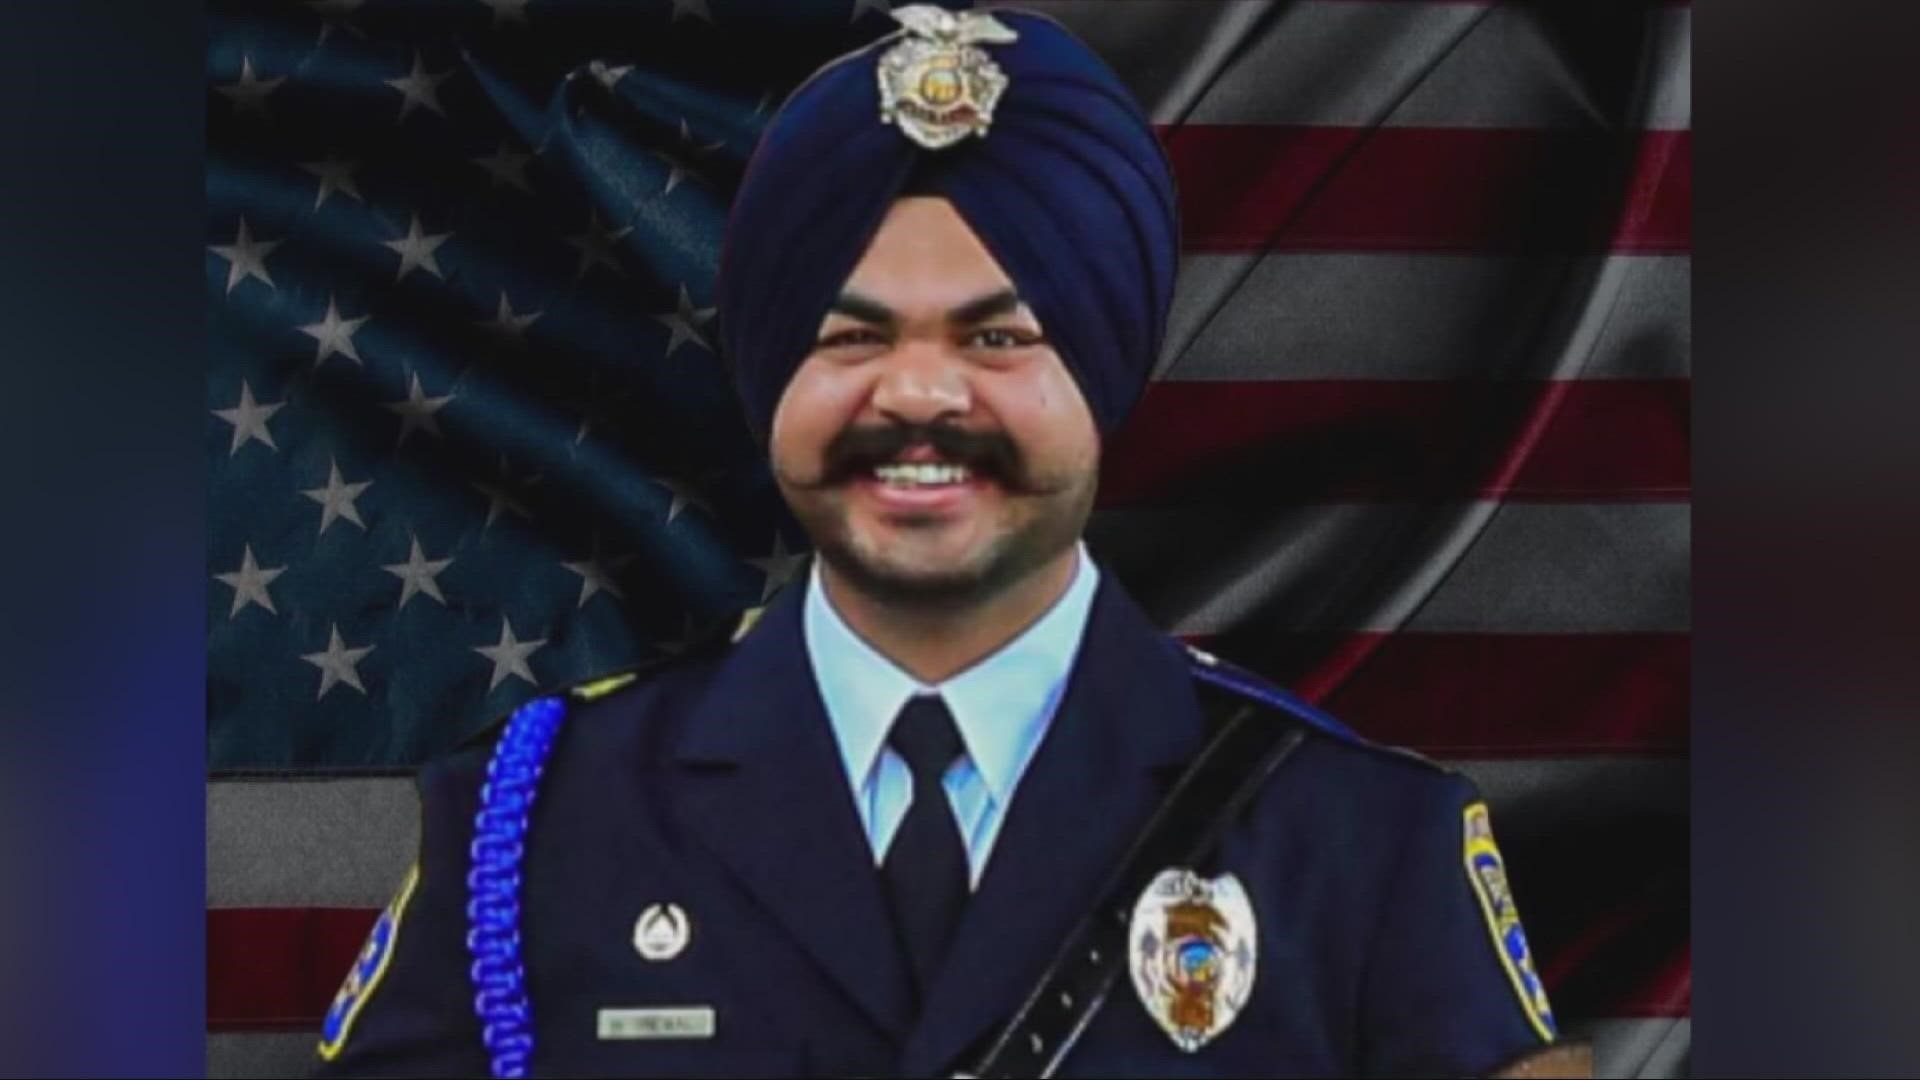 A memorial induction and wreath-laying ceremony happened in Galt Friday evening for the officer Harminder Grewal.